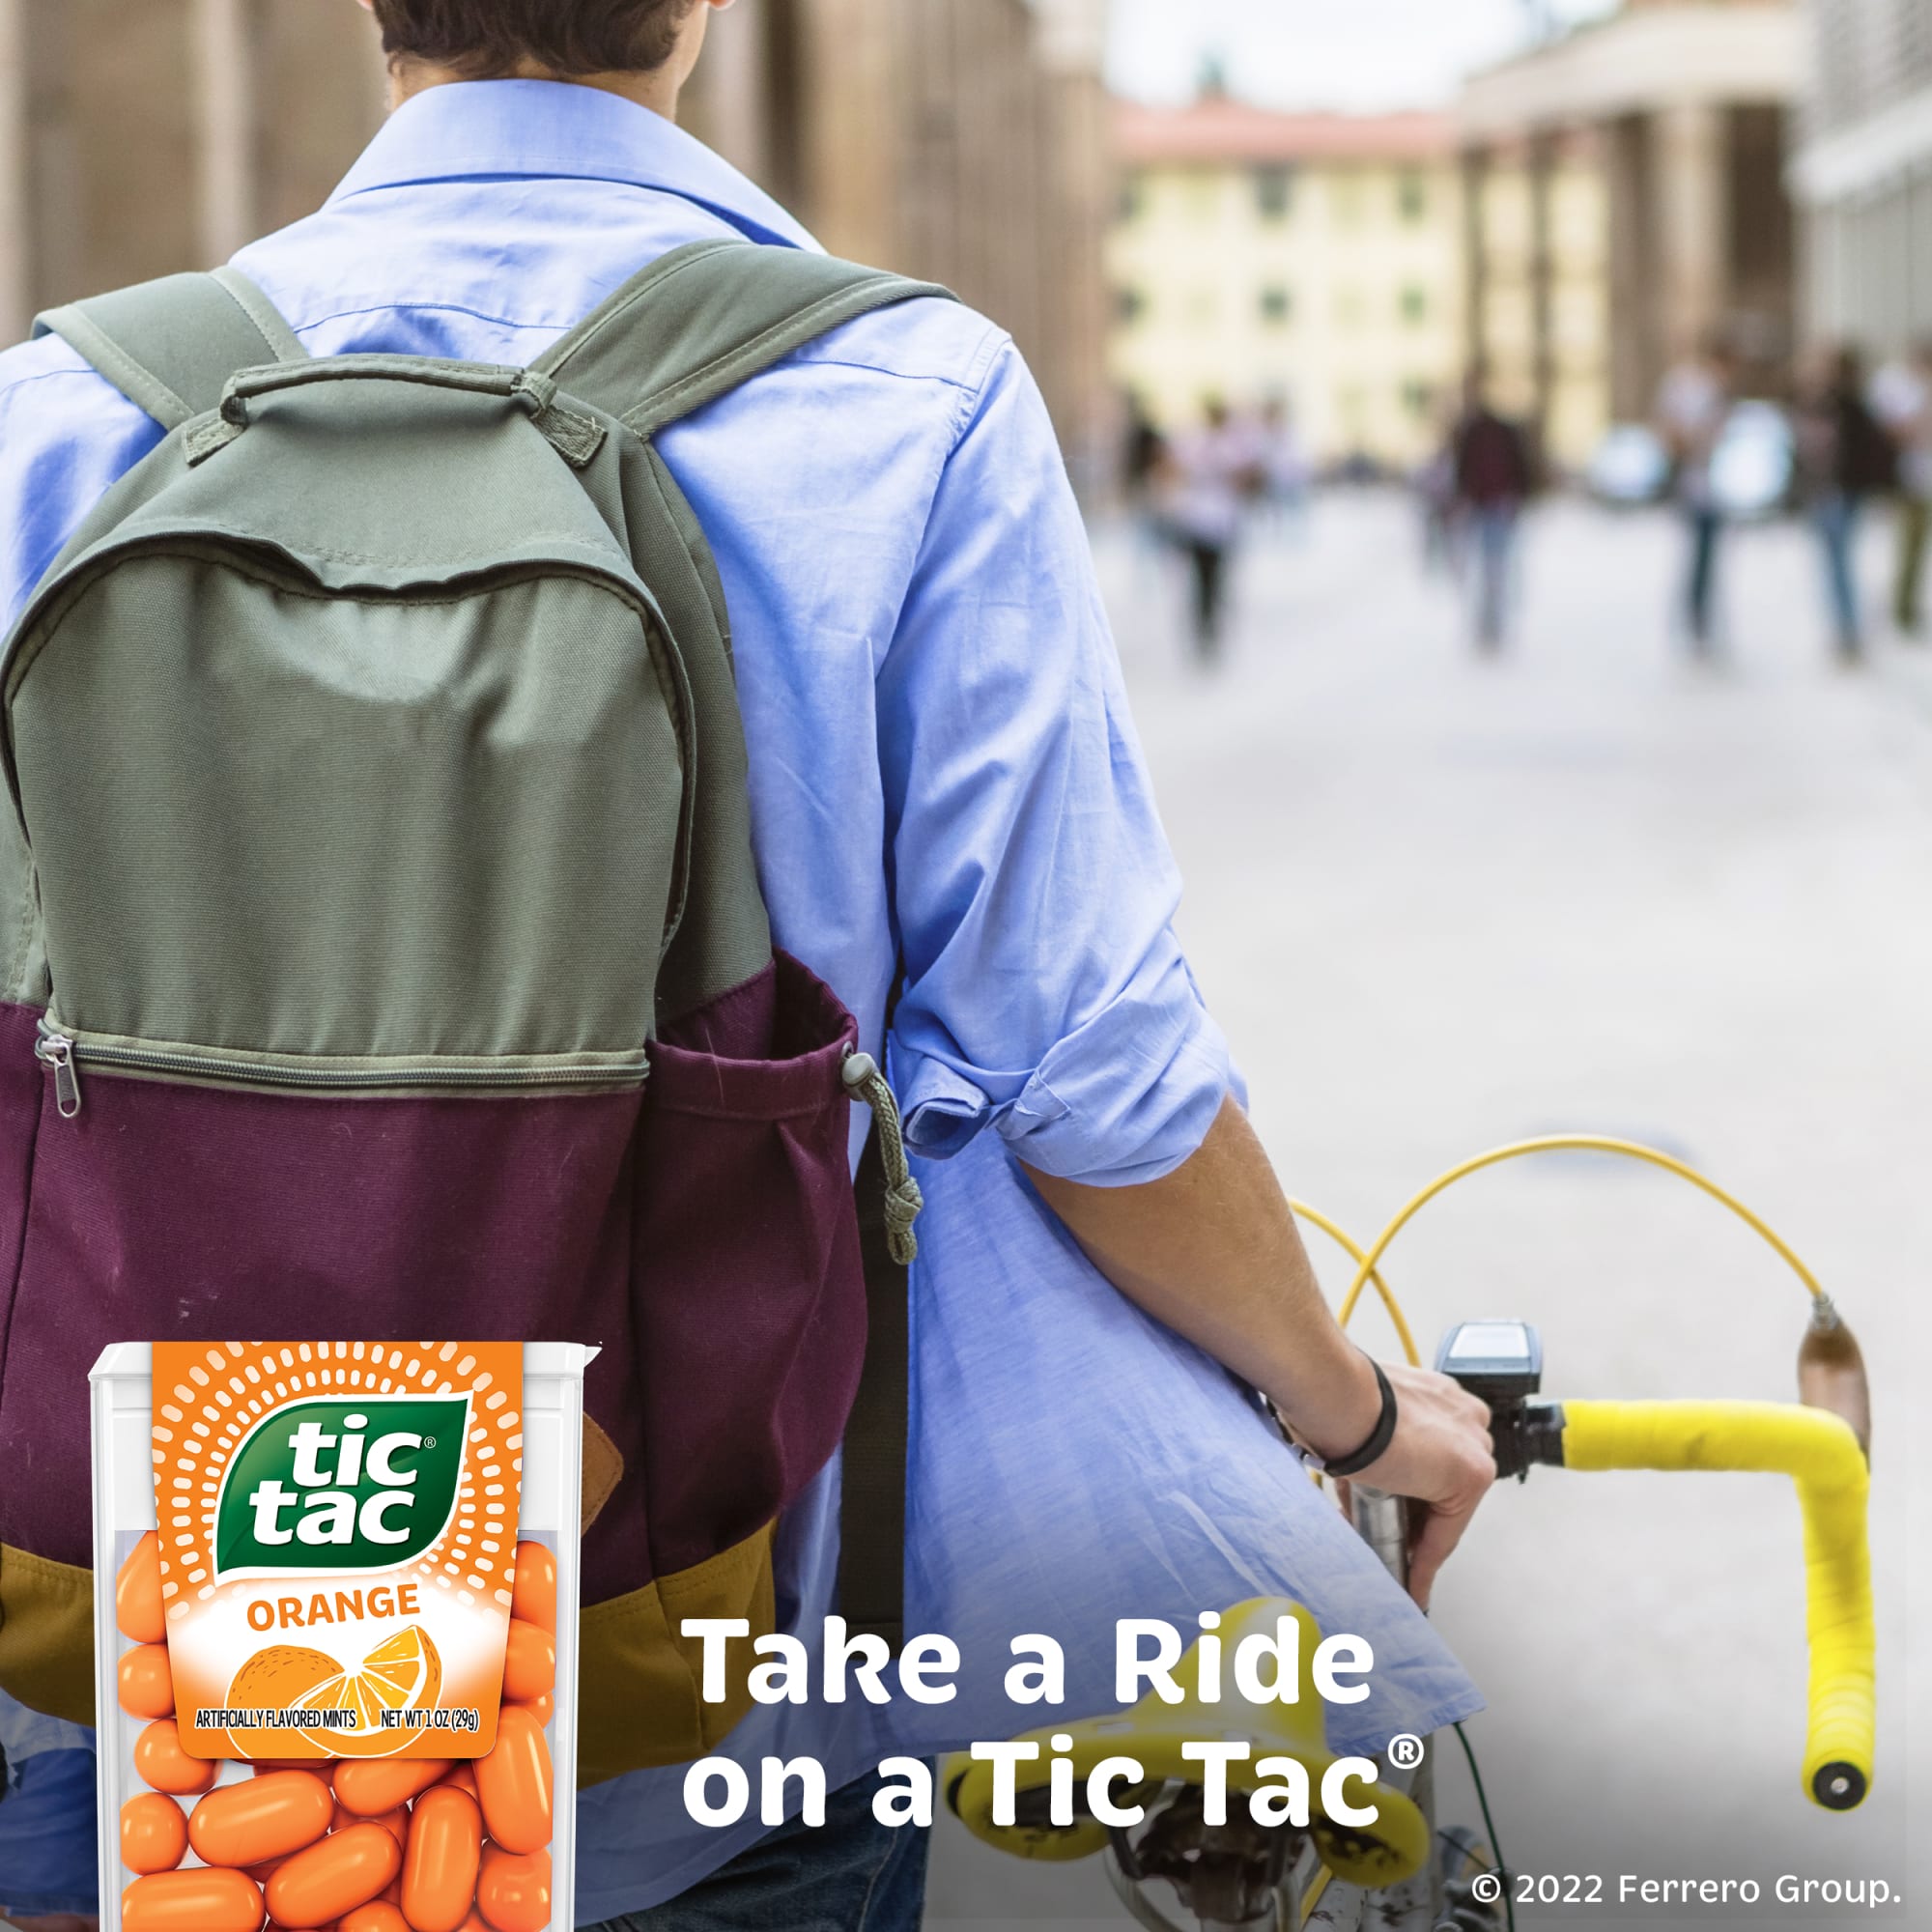 Tic Tac Orange Flavored Mints, On-The-Go Refreshment, Easter Basket Stuffers, 1 oz, Single Pack - image 4 of 10